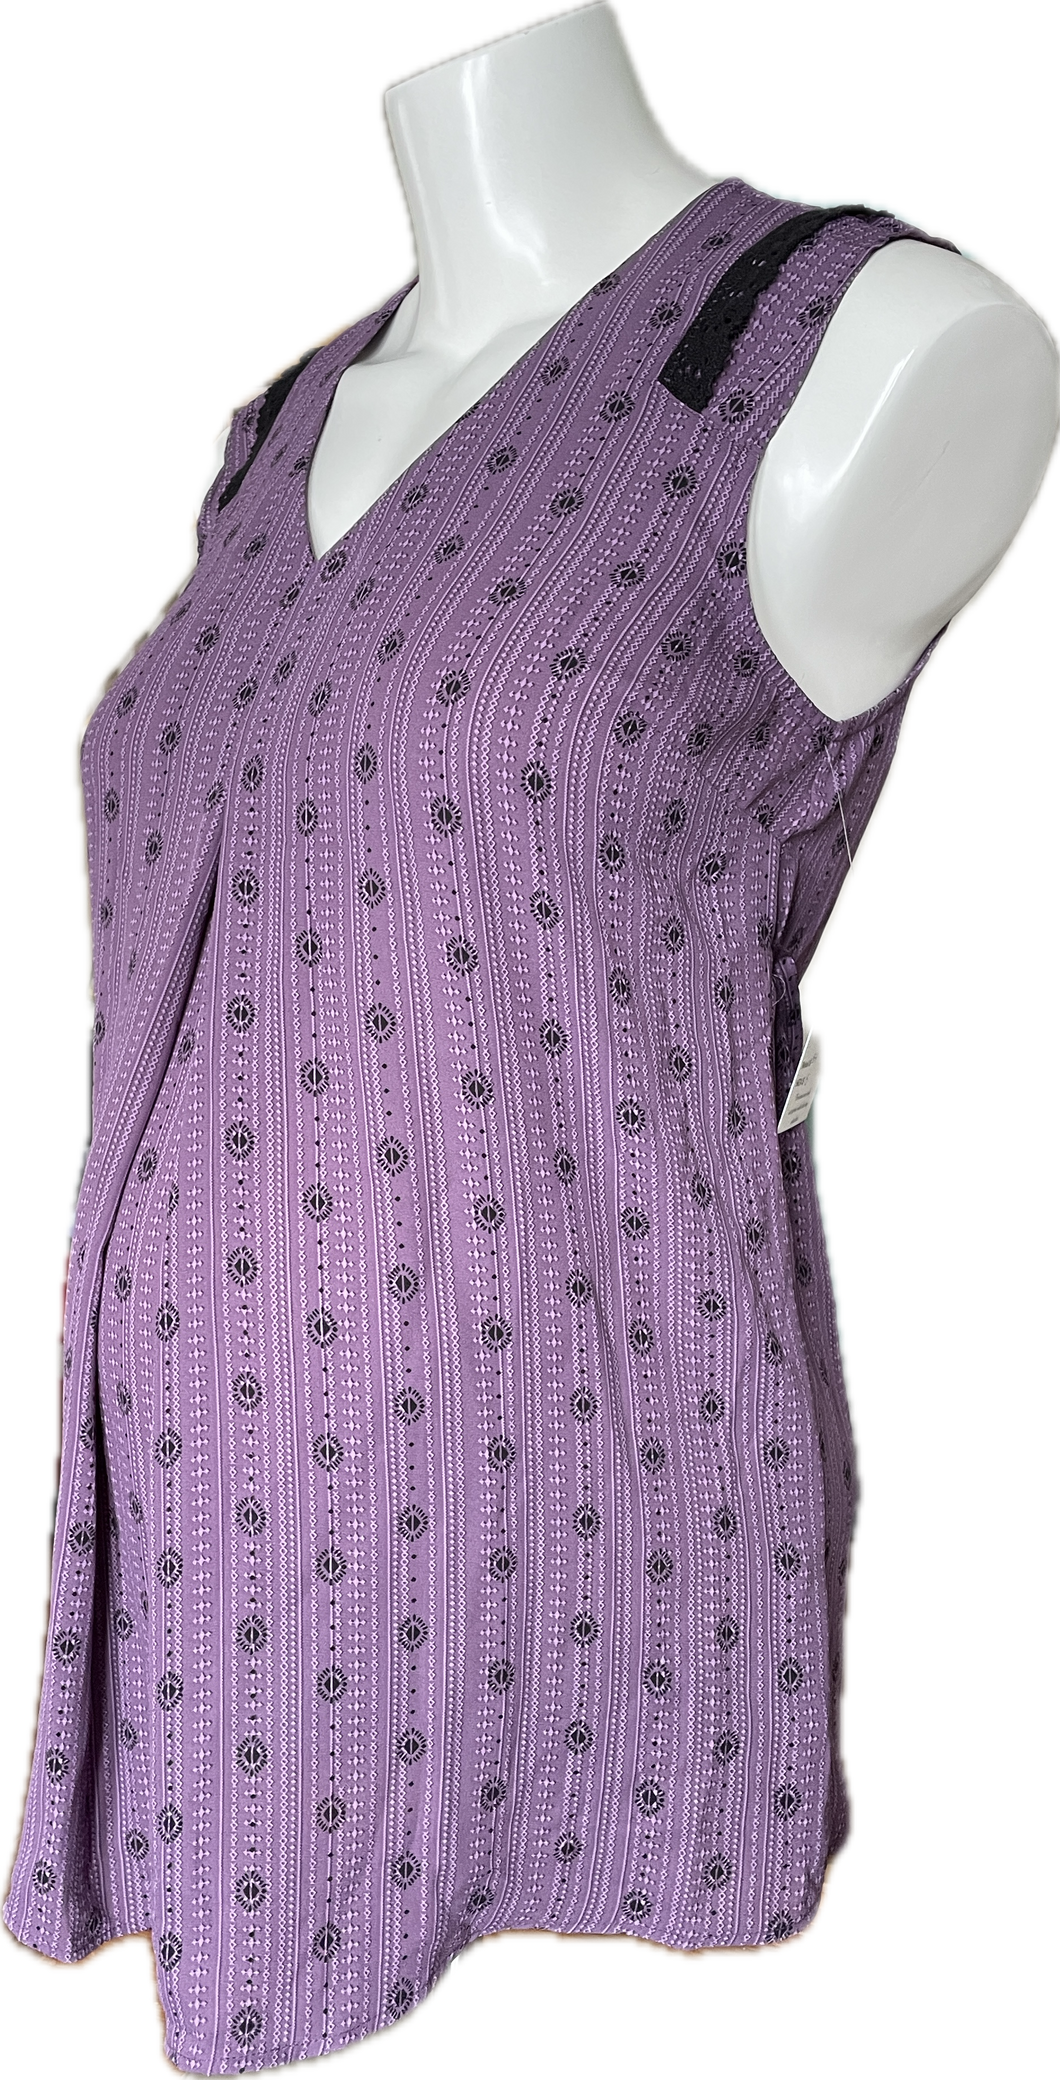 XS Thyme Maternity Sleeveless Blouse in Purple Tones